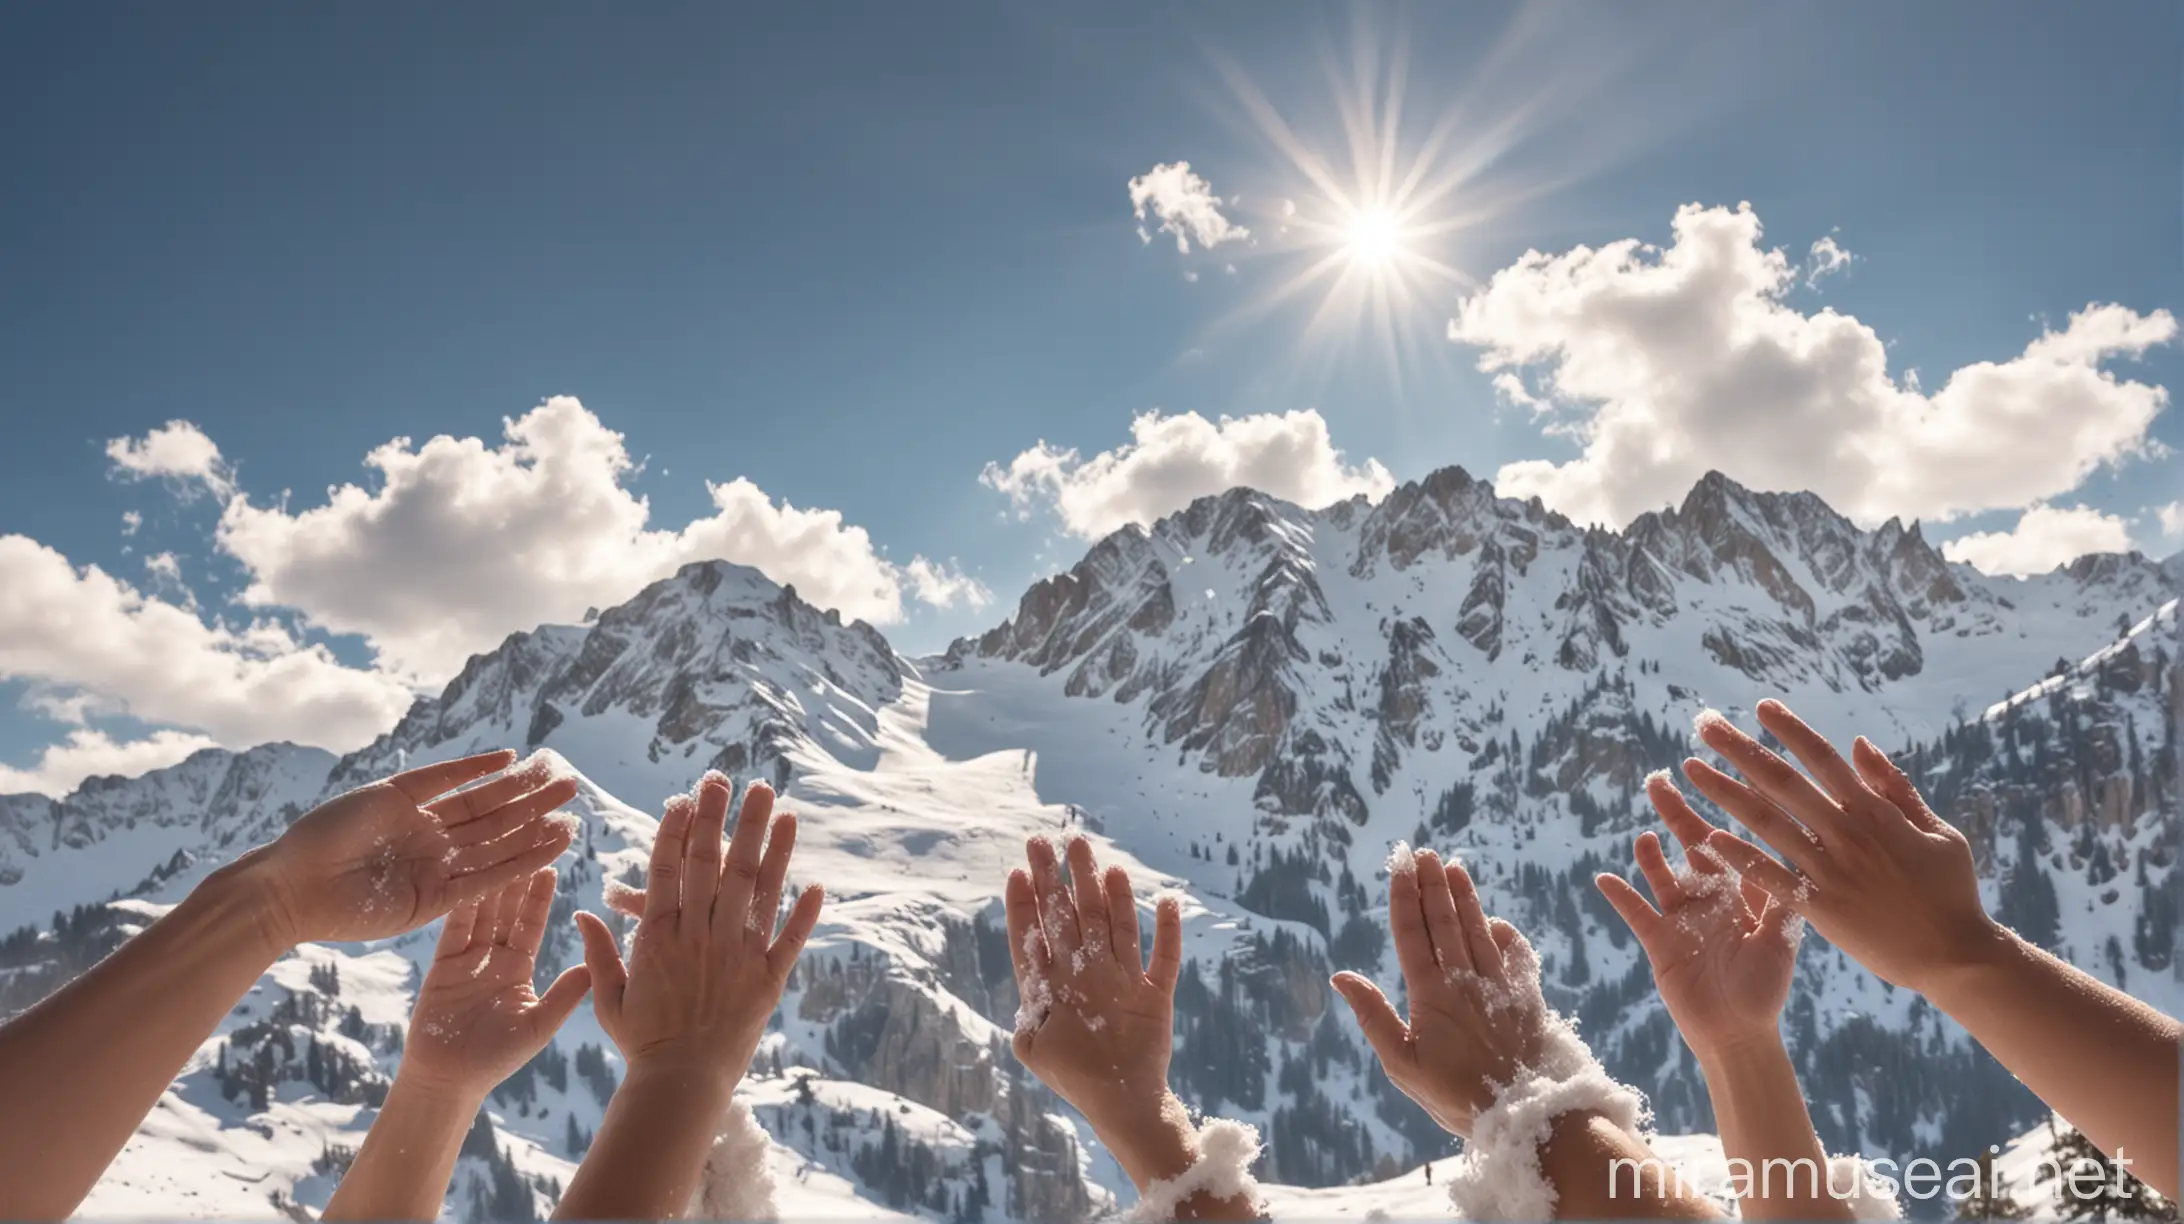 Diverse Unity Hands Reaching for the Sky amidst Snowy Mountains